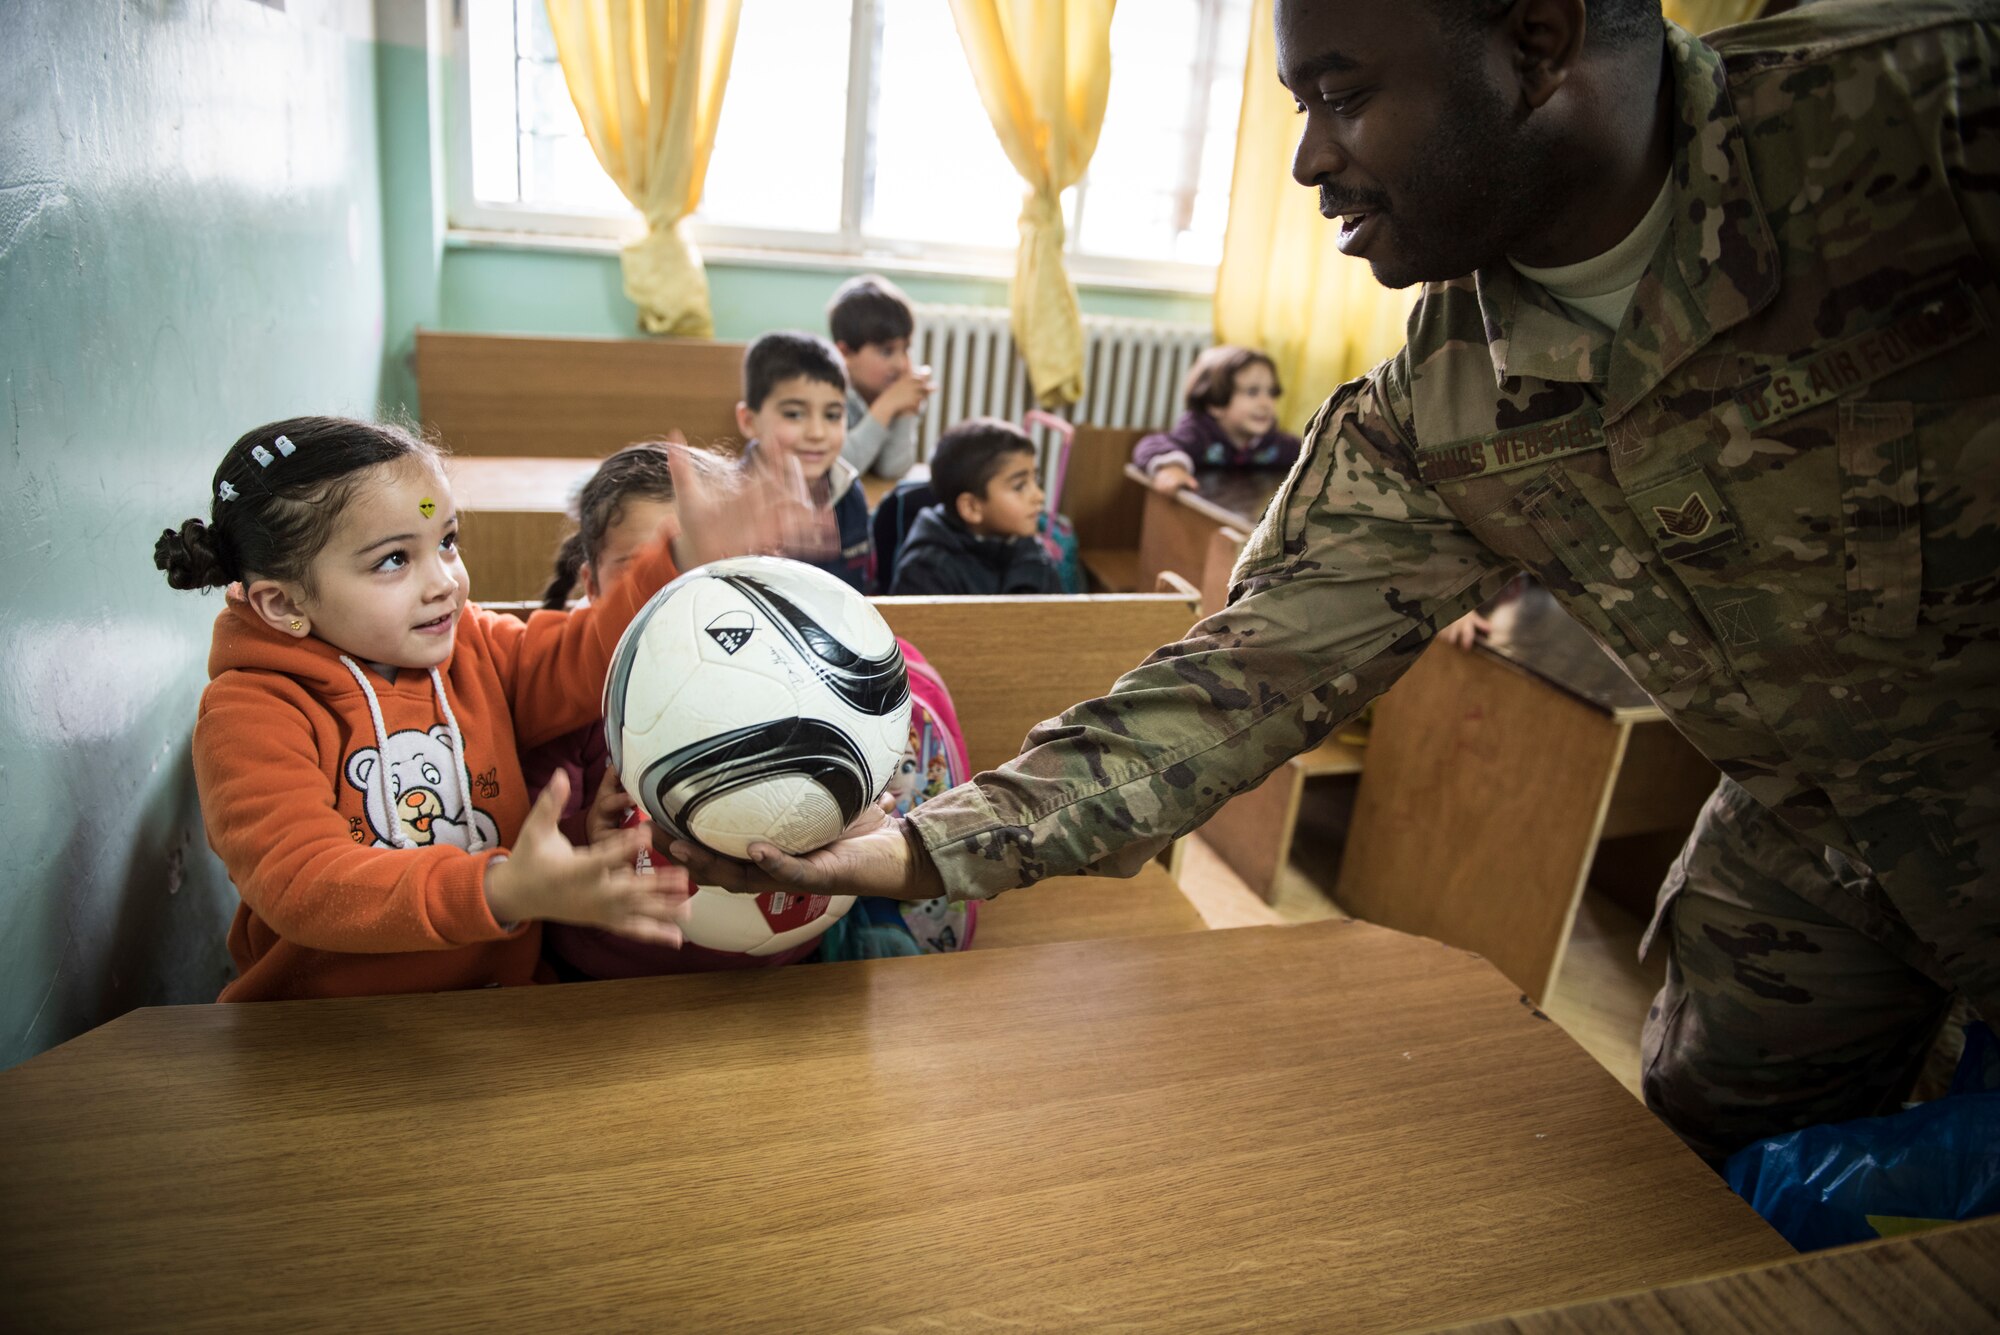 Tech. Sgt. Darren Hinds-Webster, assigned to the 332d Mission Support Group, hands out soccer balls to school children during a donation drop-off February 26, 2018, at an undisclosed location. Service members reached out to family and friends back home and were able to provide school supplies and soccer balls to two local schools, as well as clothing, books, and hygiene products for refugees in the region. (U.S. Air Force photo by Staff Sgt. Joshua Kleinholz)